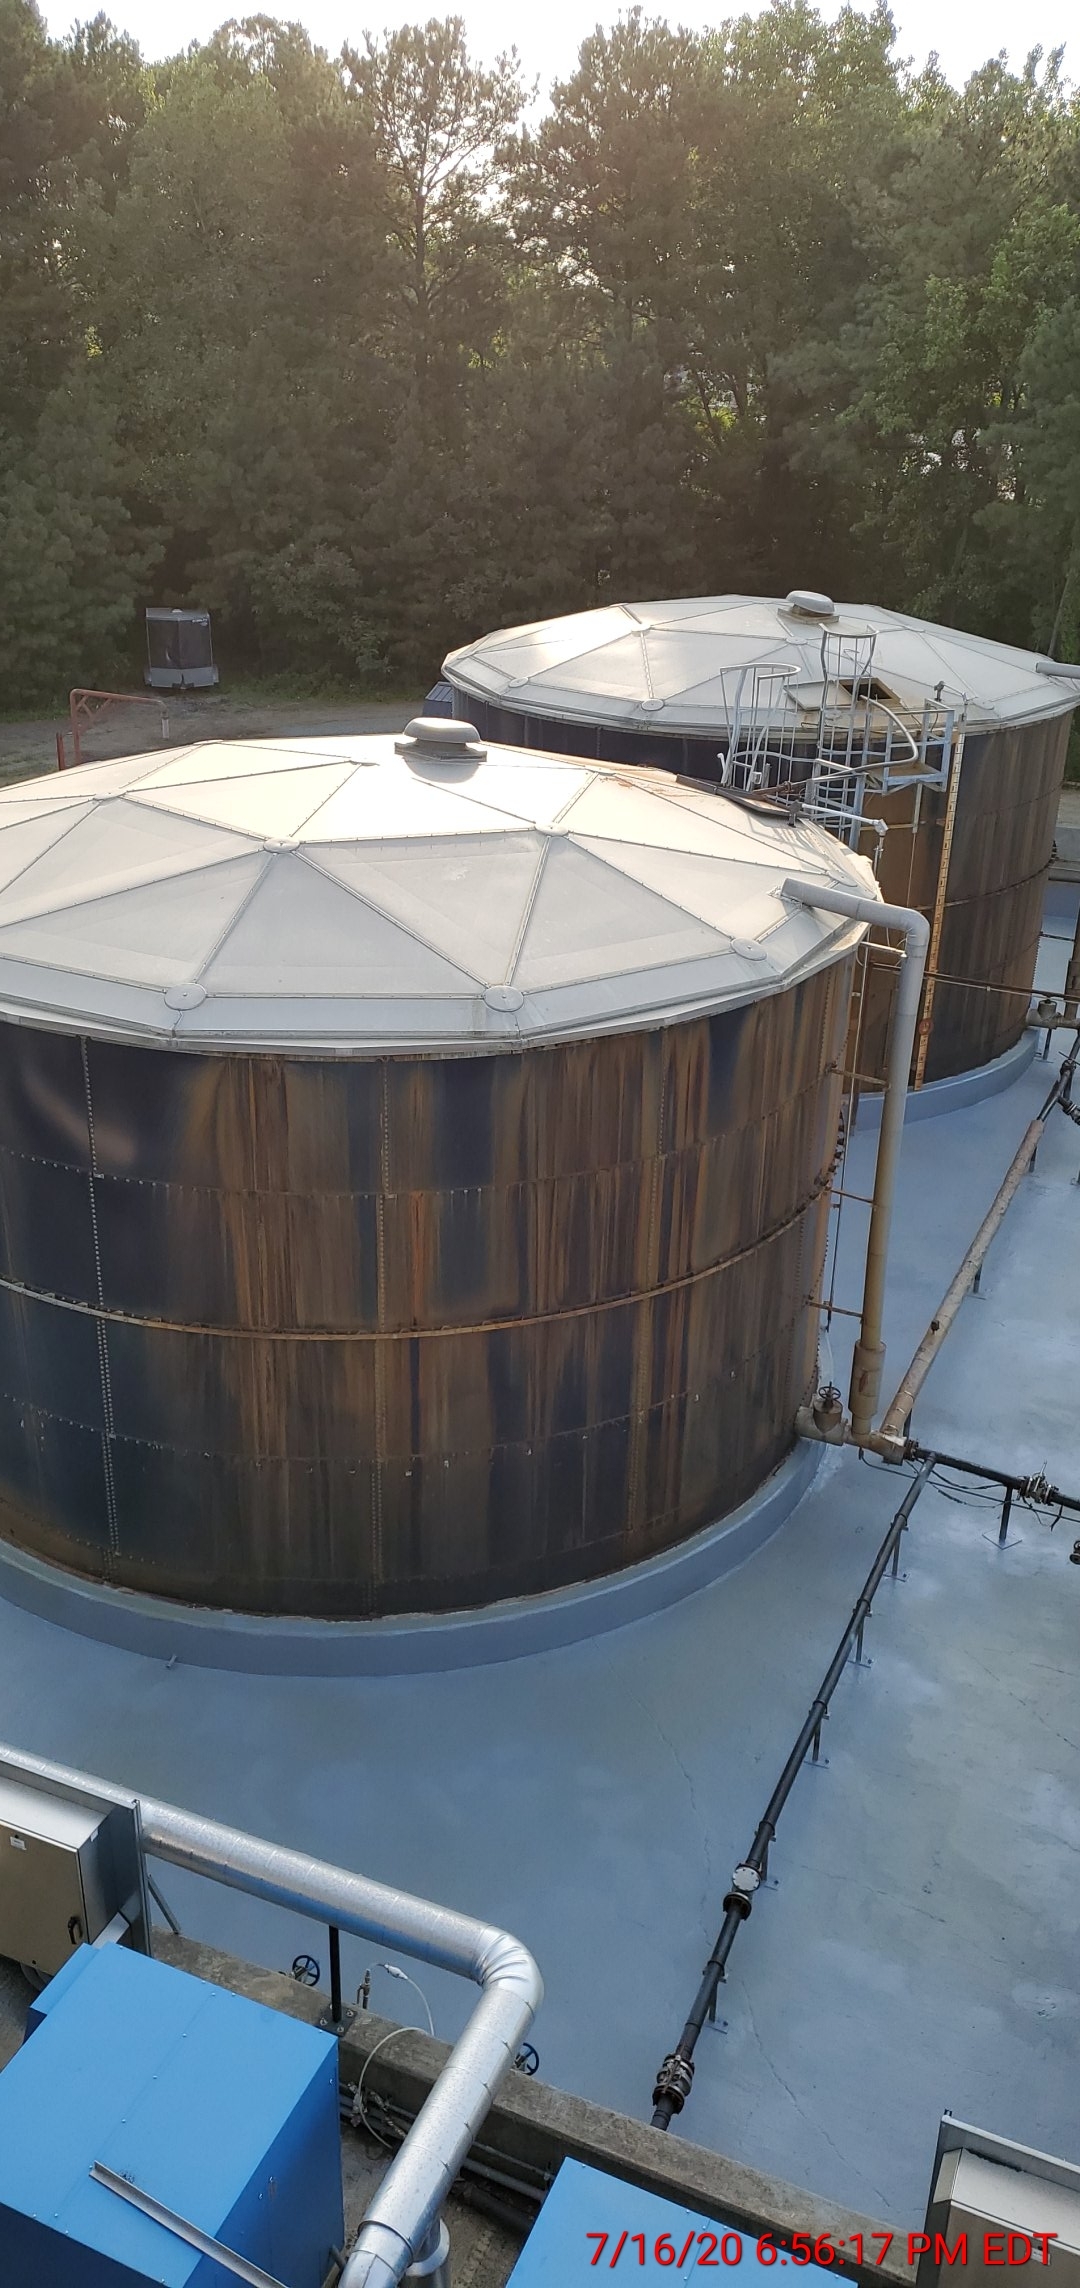 Side view of sulfuric acid tanks in the secondary containment area at Old Dominion Landfill after polyurea spray liner installation